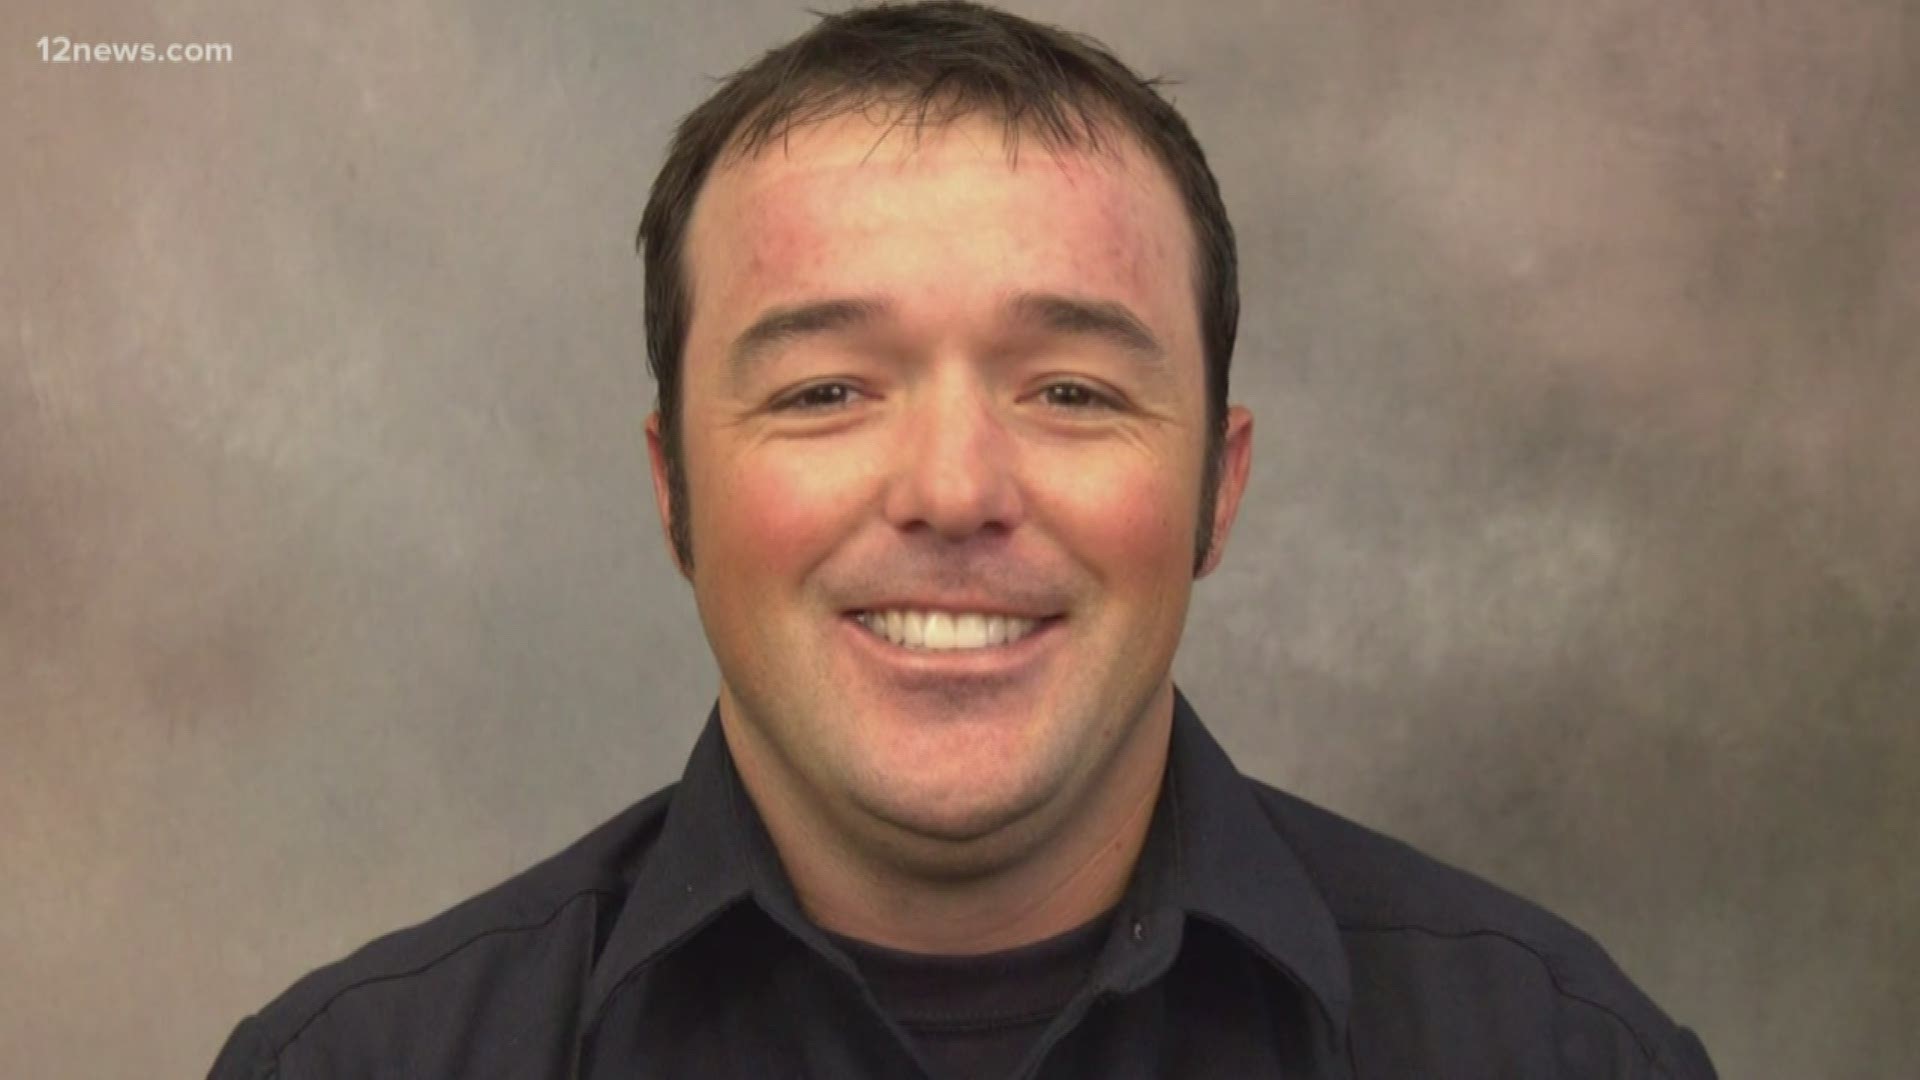 Austin Peck was an 11-year veteran with the Goodyear Fire Department. He leaves behind his wife and two daughters. "Austin was known for being willing to do anything for his brothers and sisters at any time," the department said.